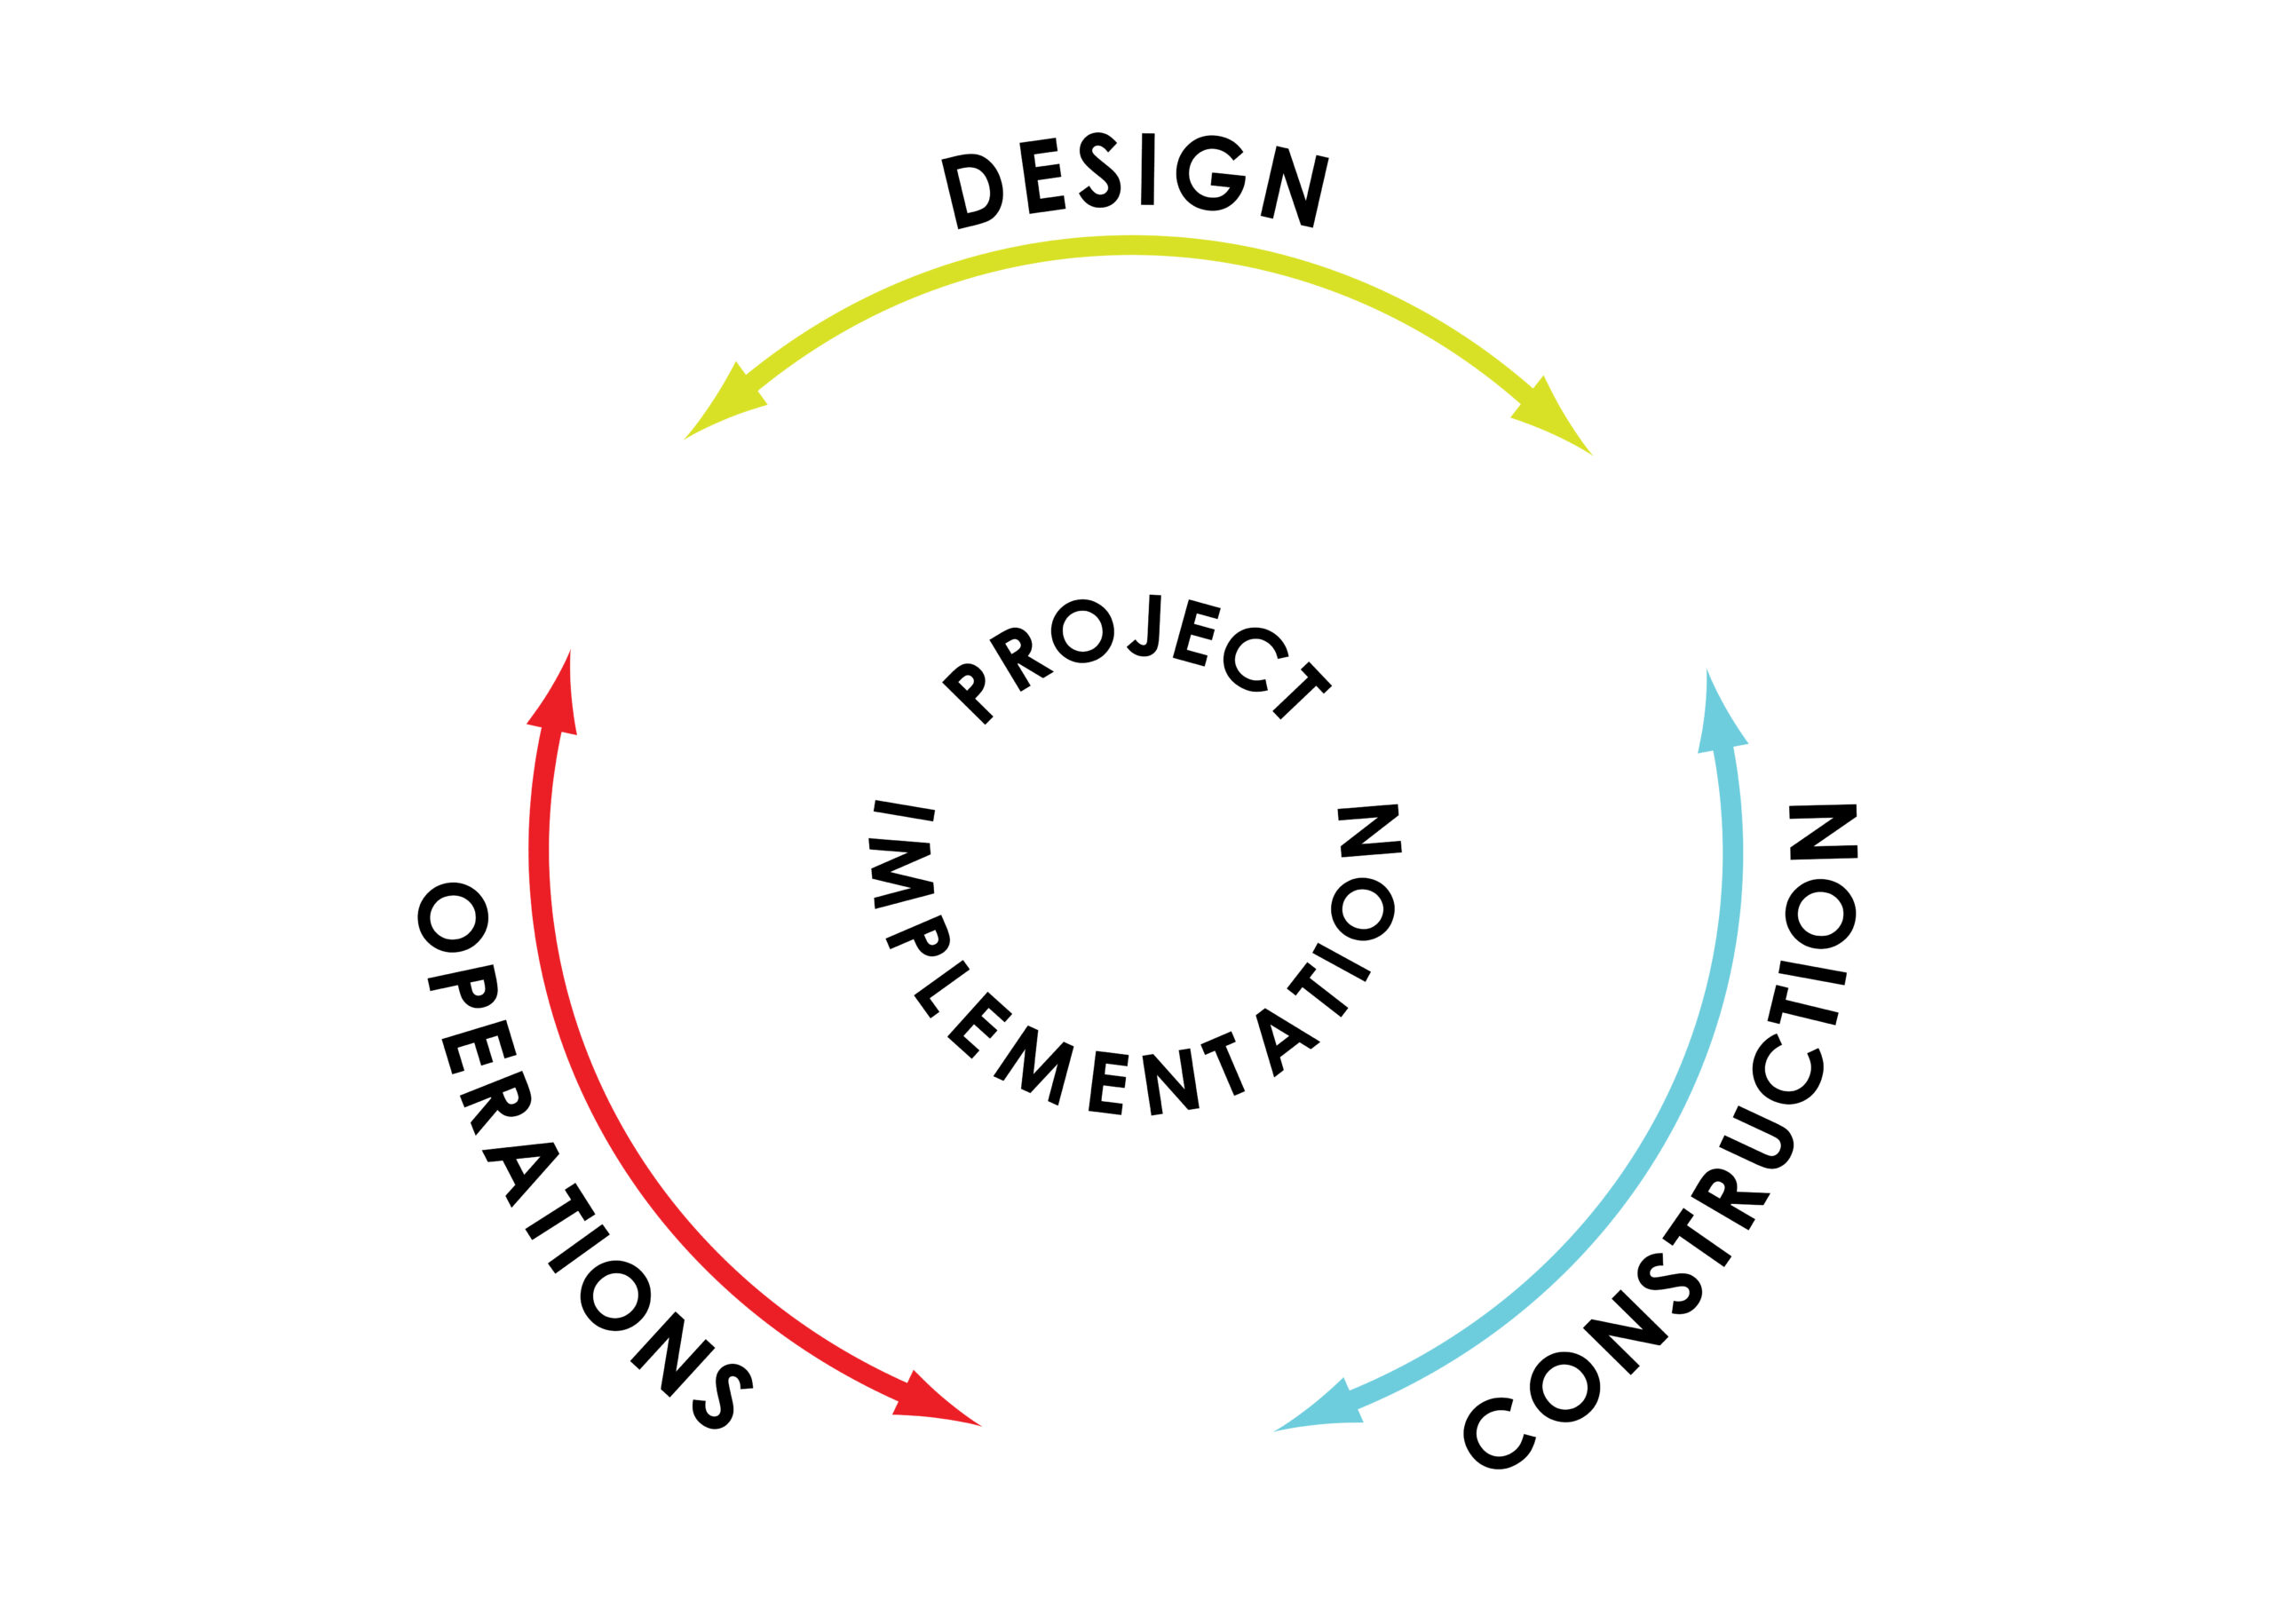 A diagram showing the interconnectedness of design, construction, and operations in project implementation. The words "design", "construction", and "operations" are equally spaced around a circle with arrows connecting the elements to each other.